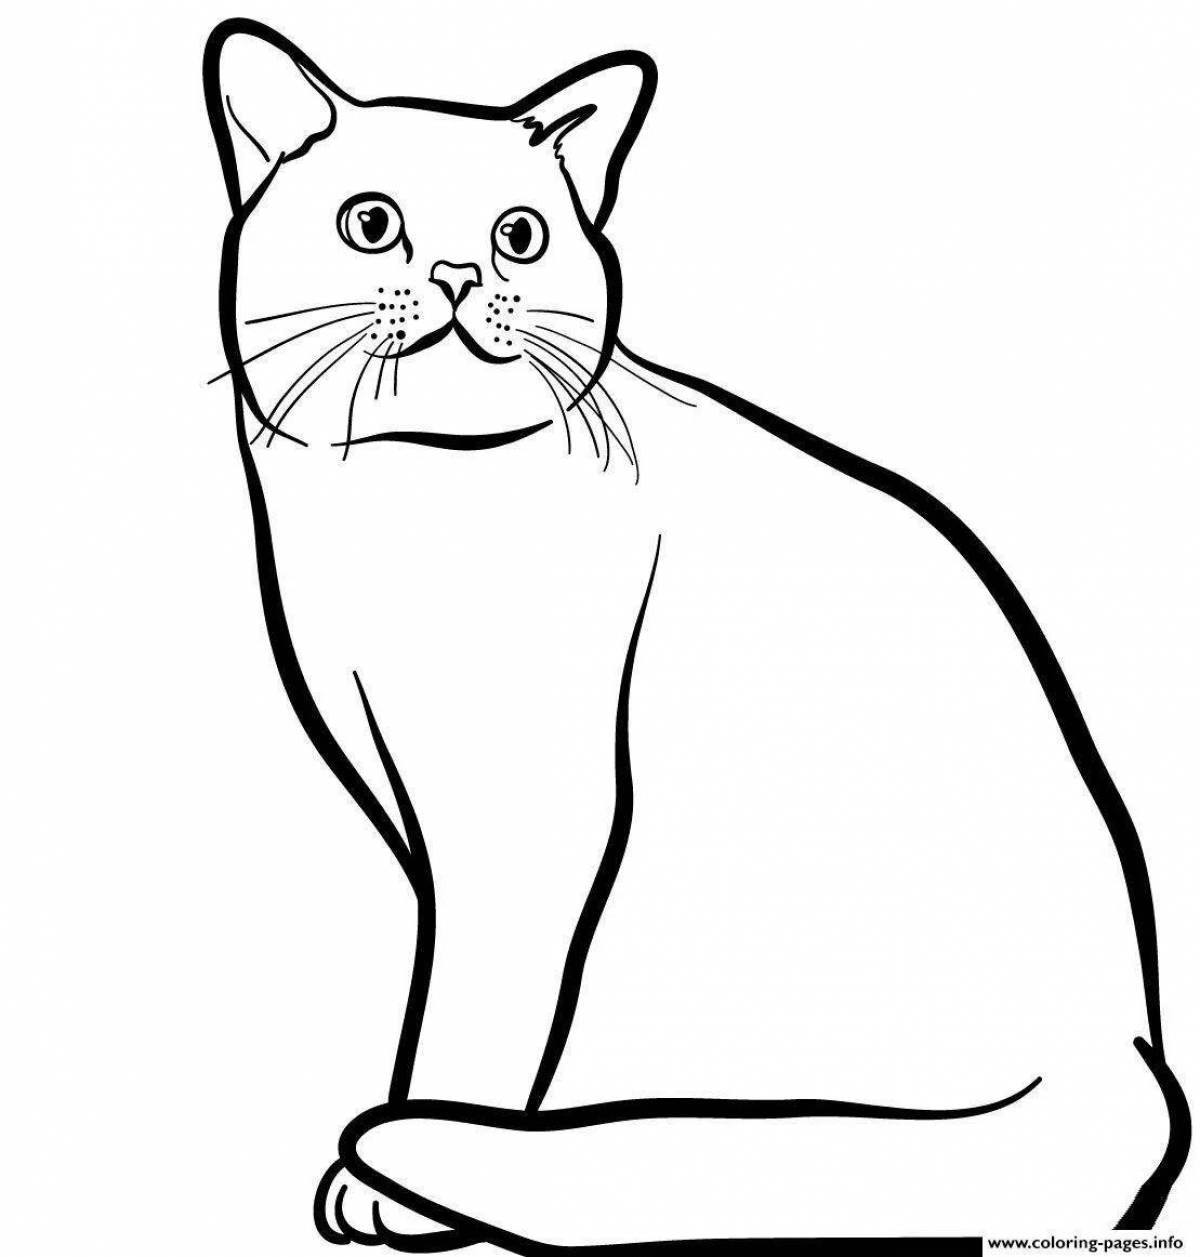 Funny coloring of the British cat